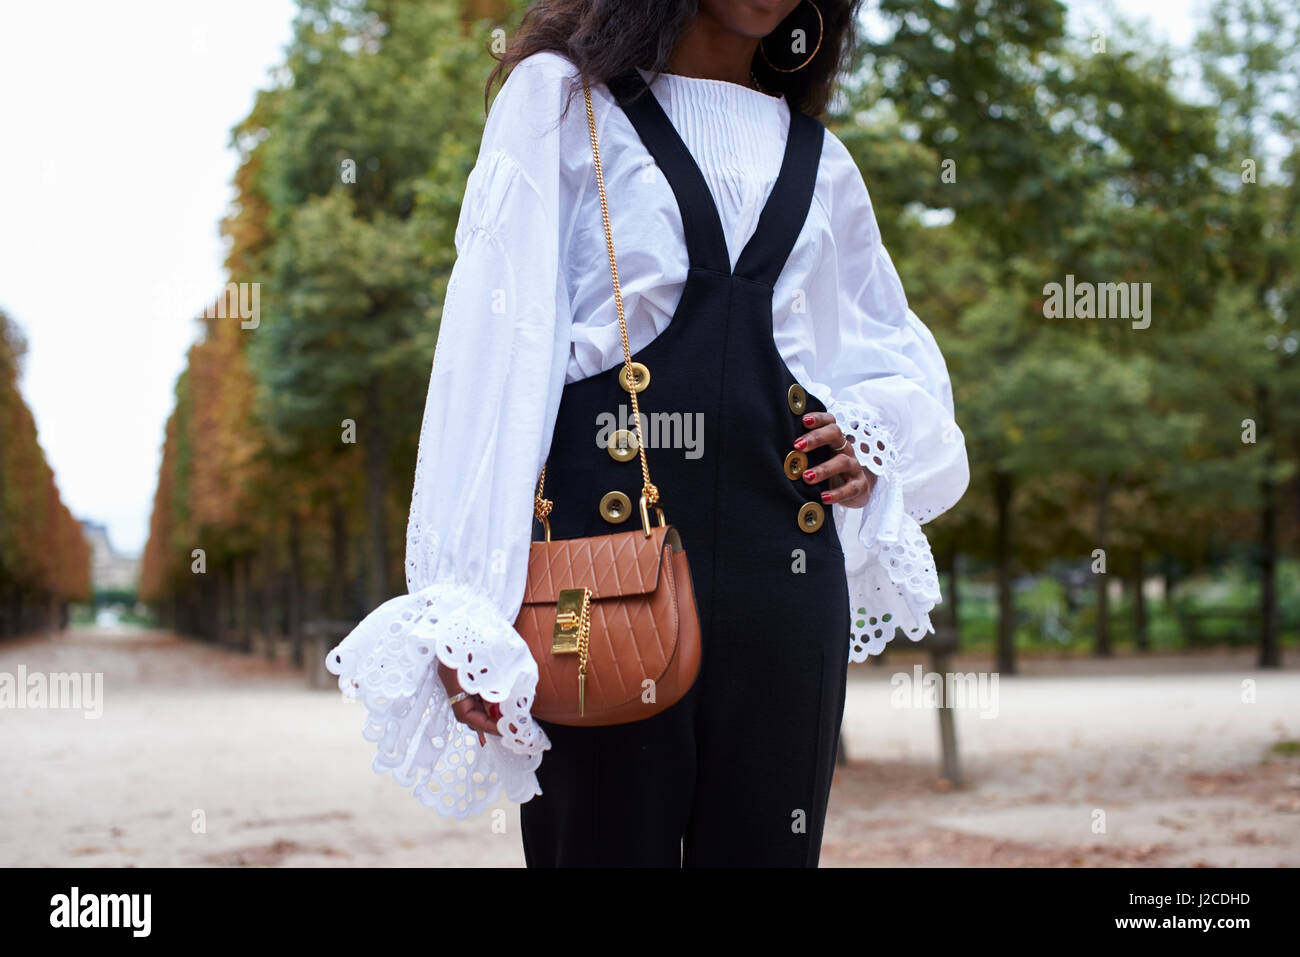 Woman in dungarees and a gypsy blouse with bag, mid section Stock Photo